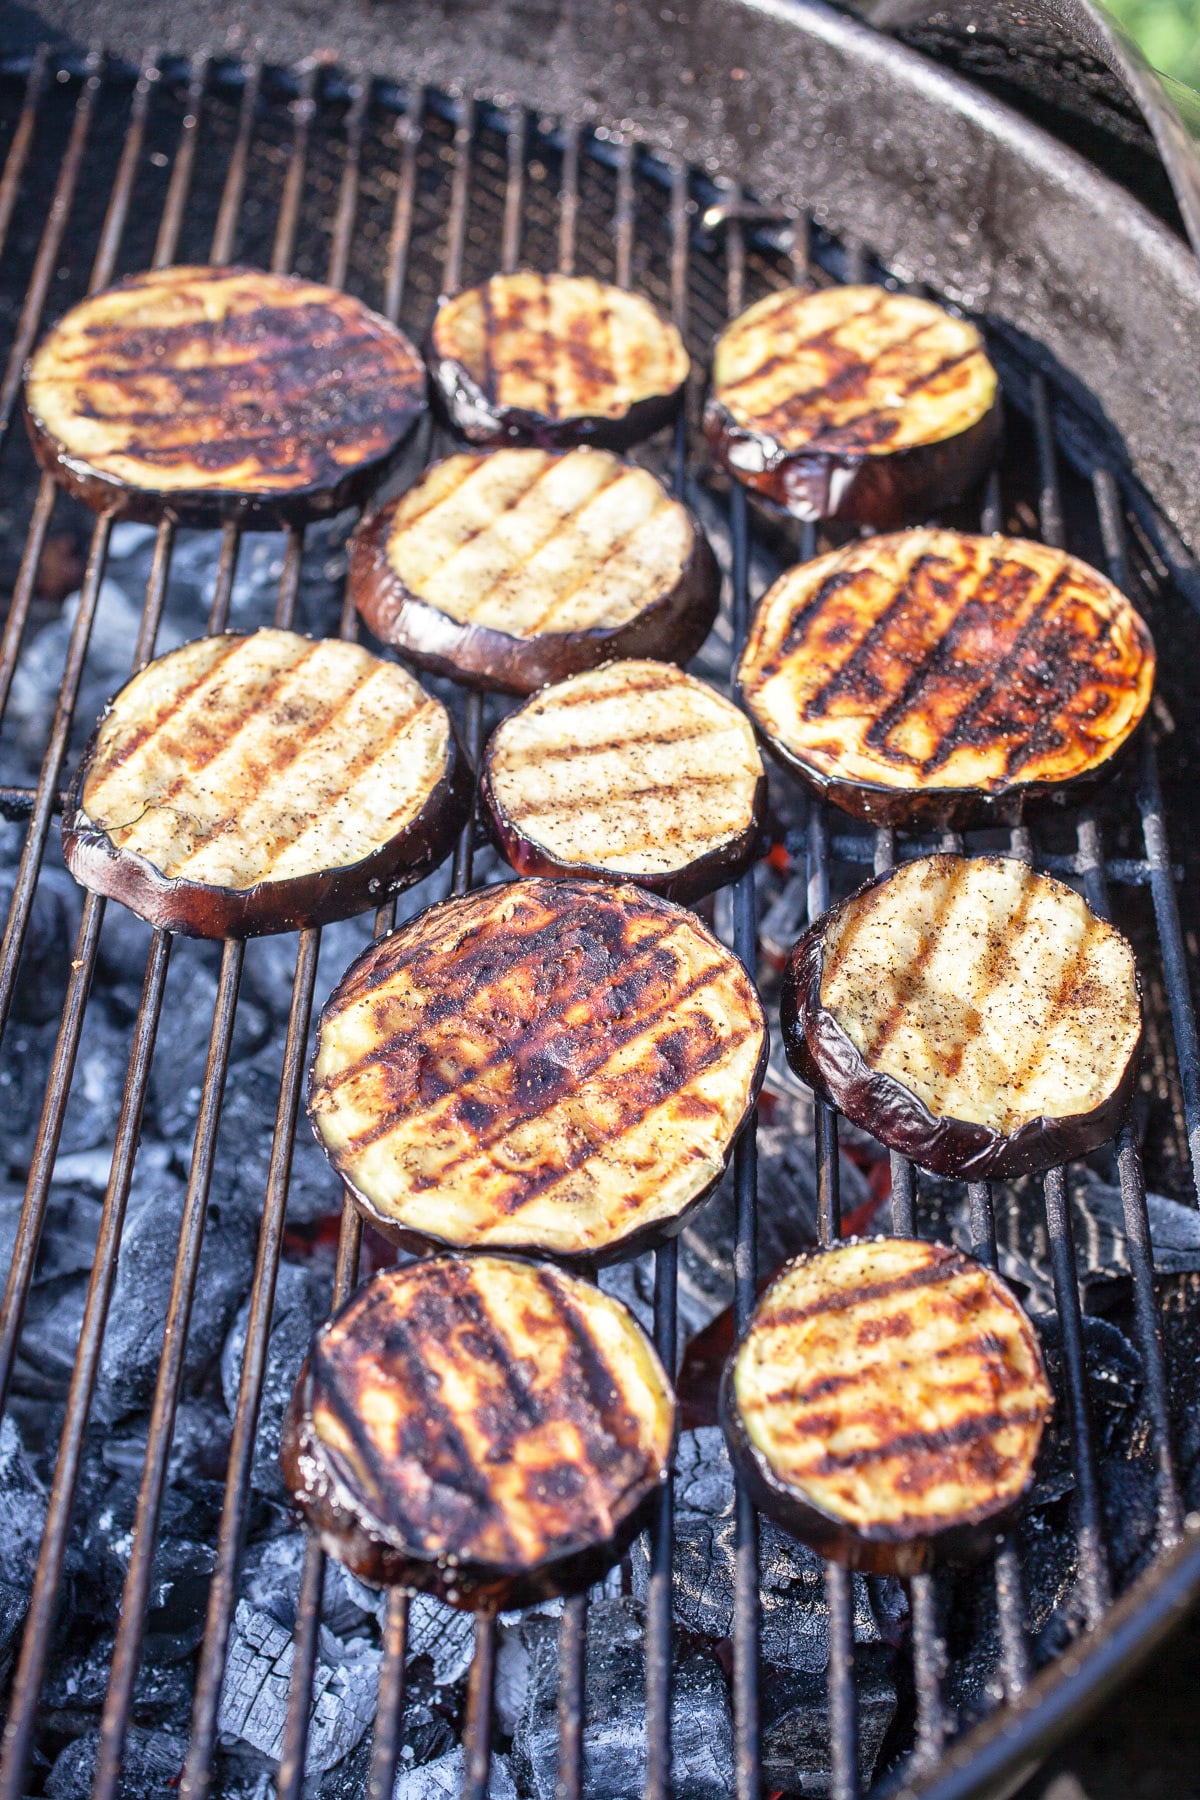 Cooked sliced eggplant on charcoal grill.